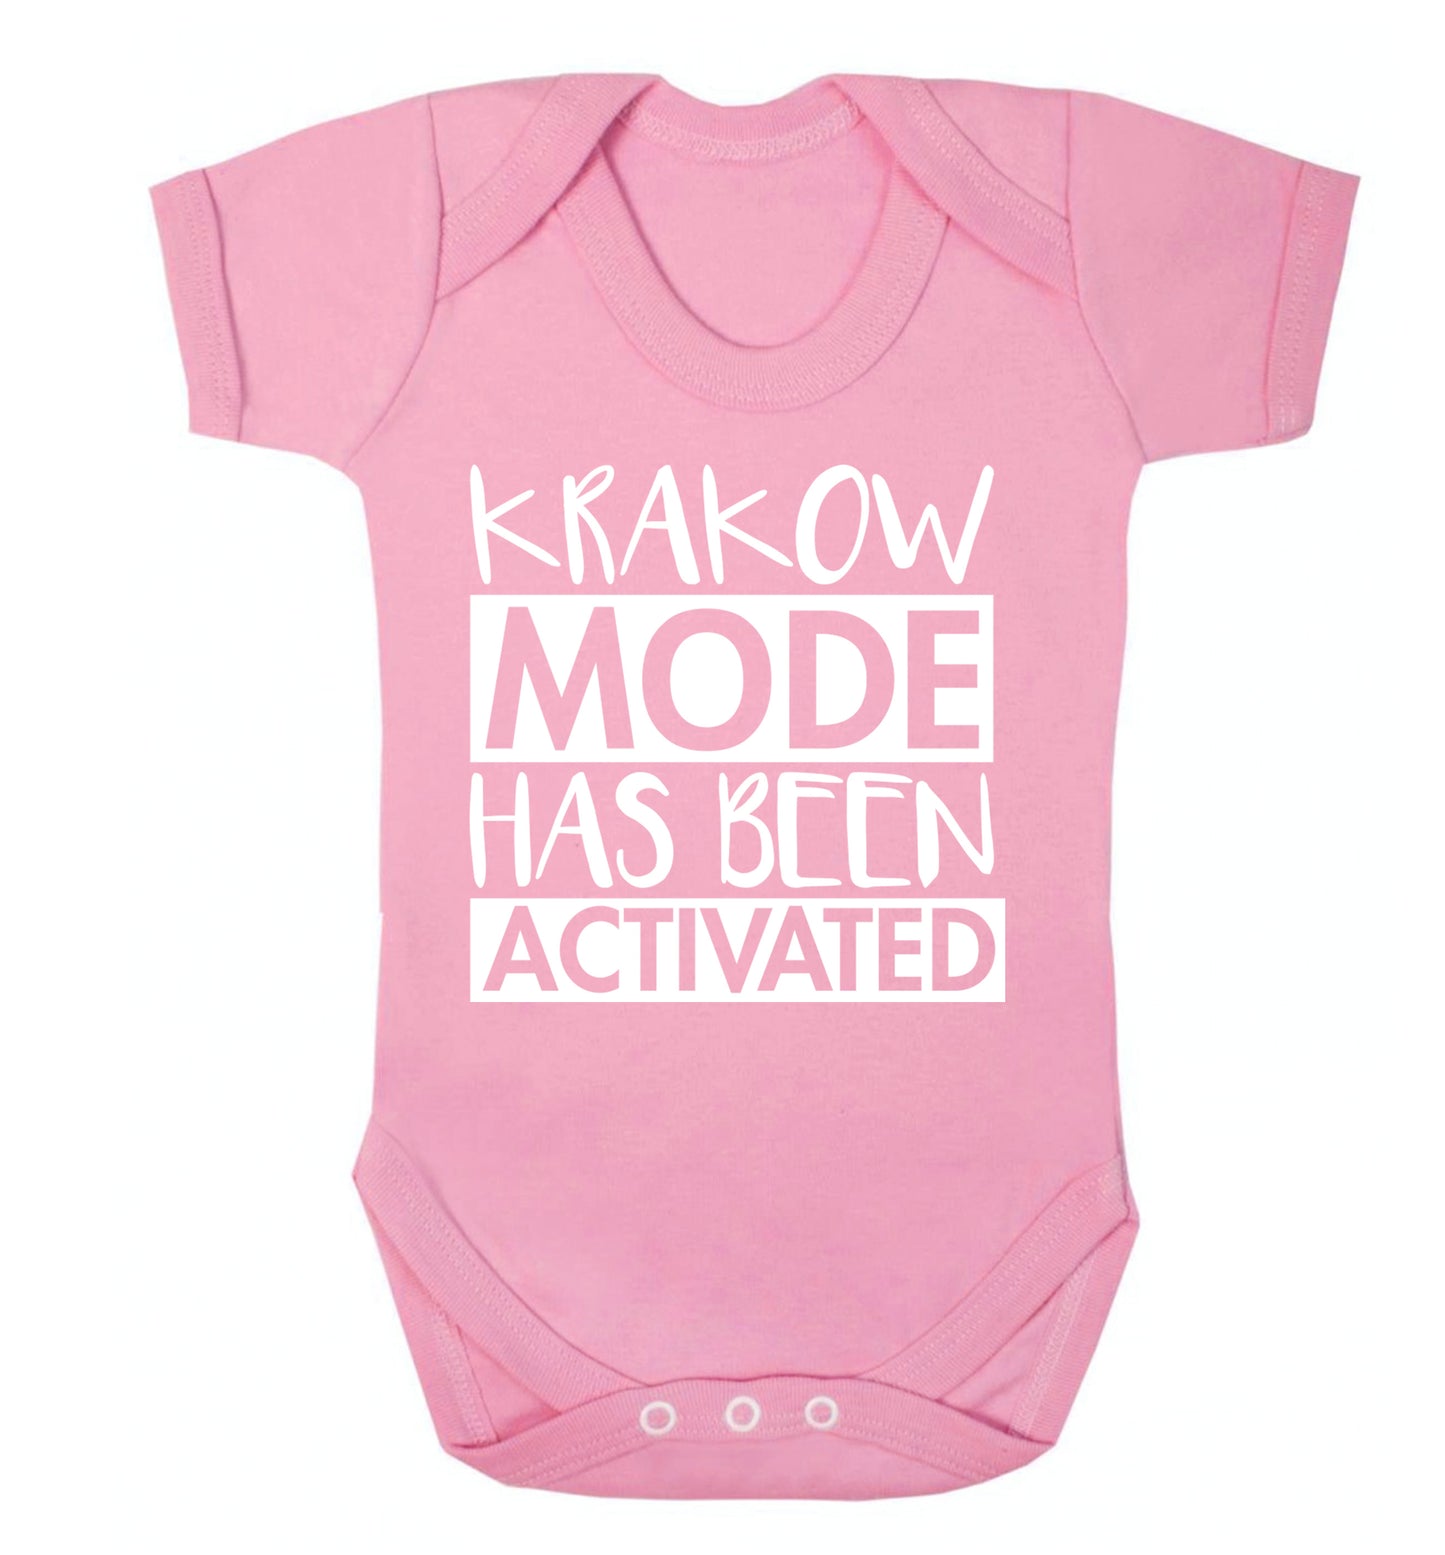 Krakow mode has been activated Baby Vest pale pink 18-24 months